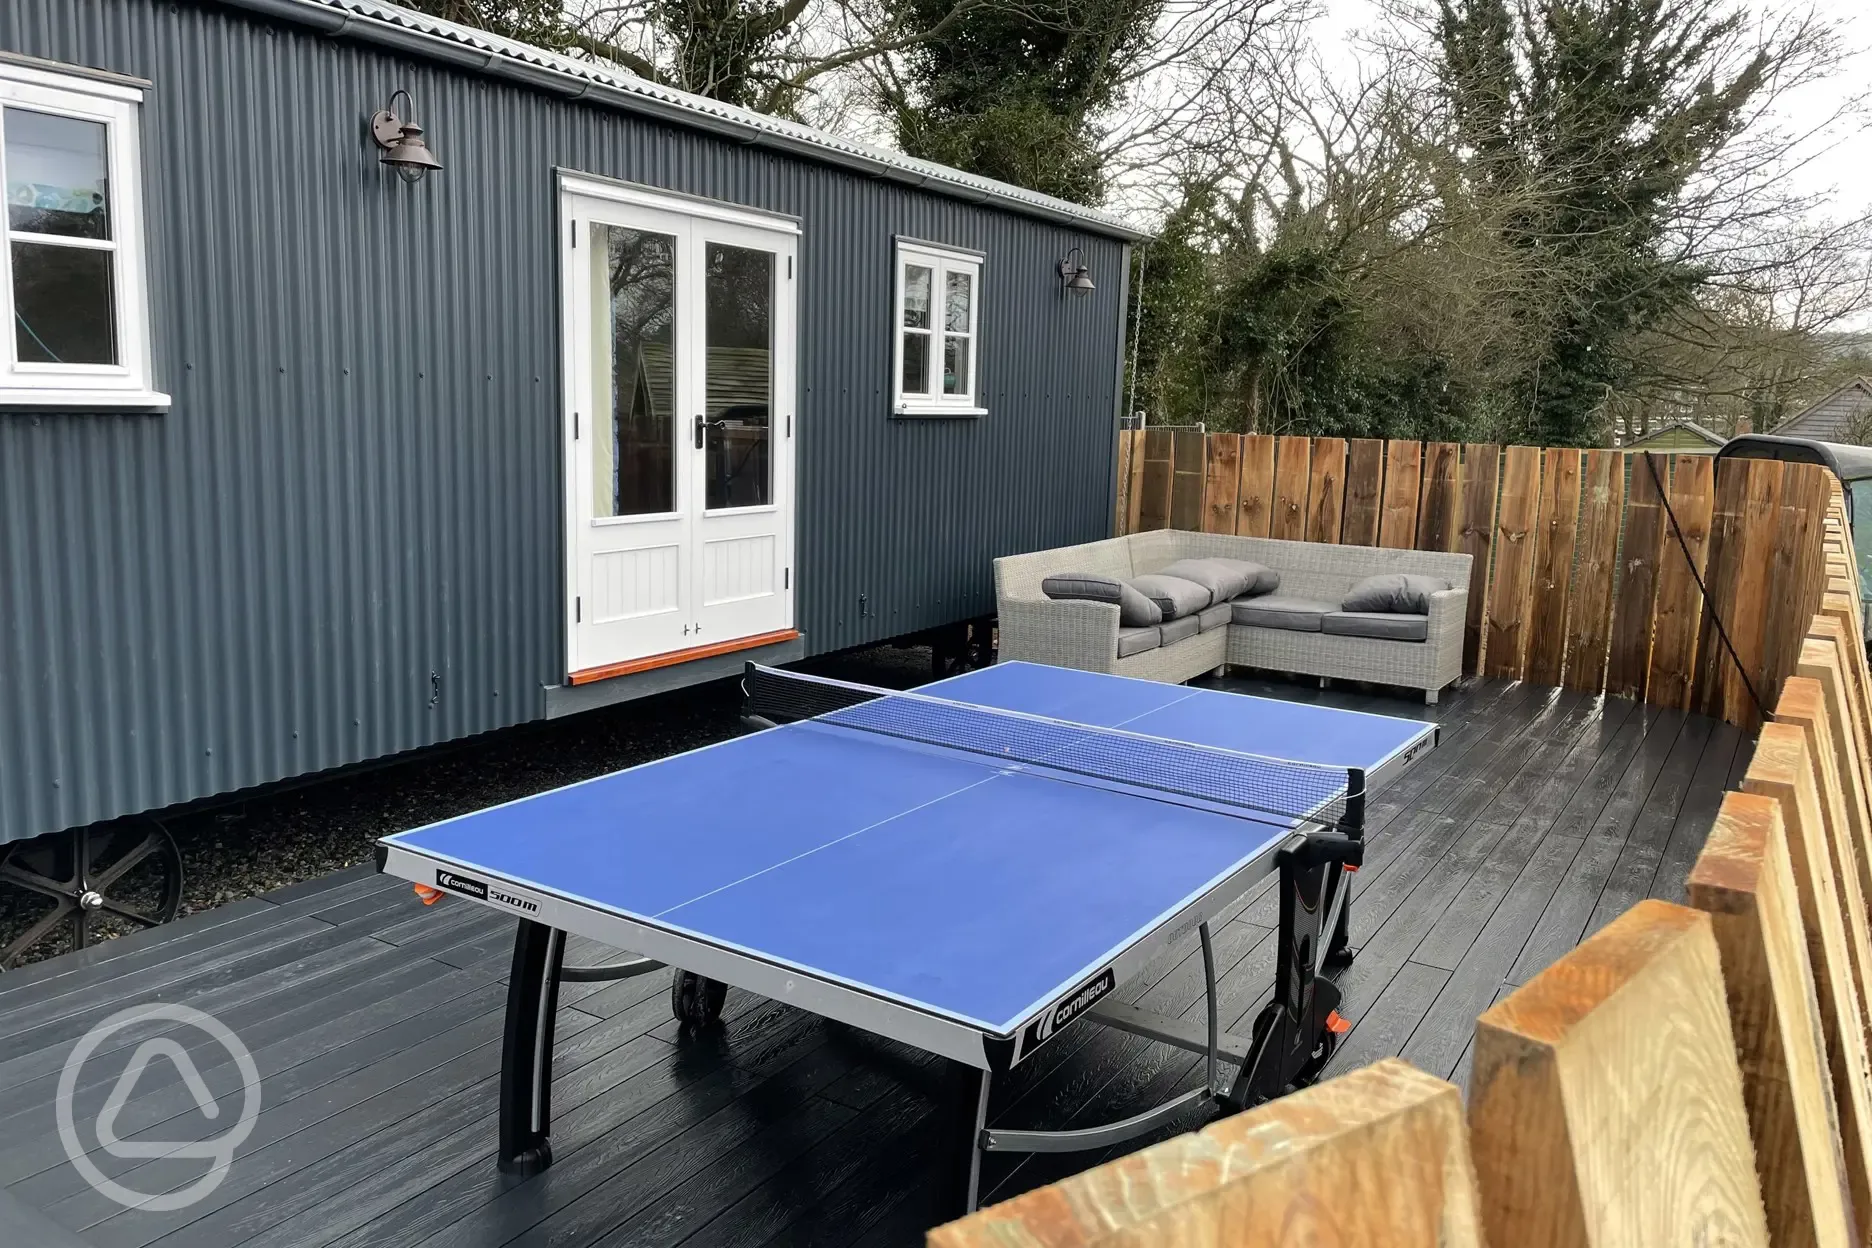 Shepherd's hut and table tennis table